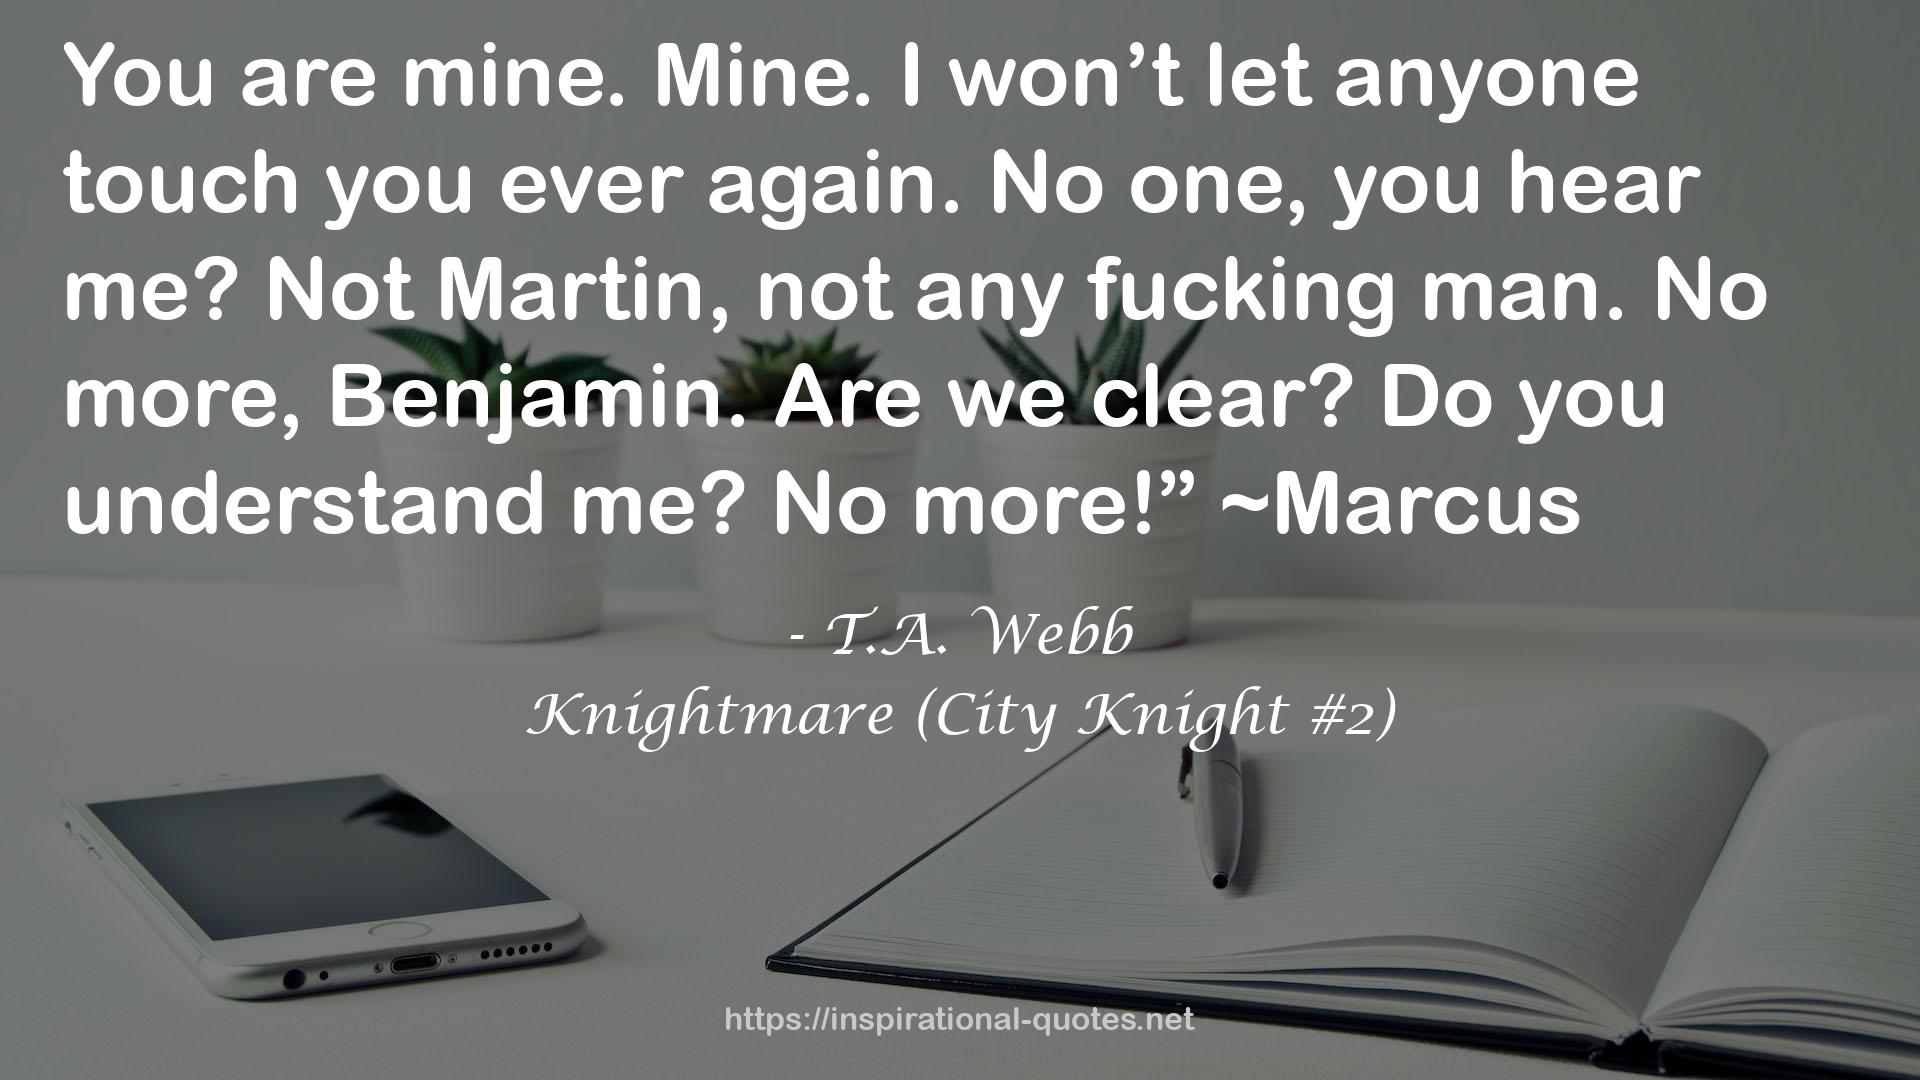 Knightmare (City Knight #2) QUOTES